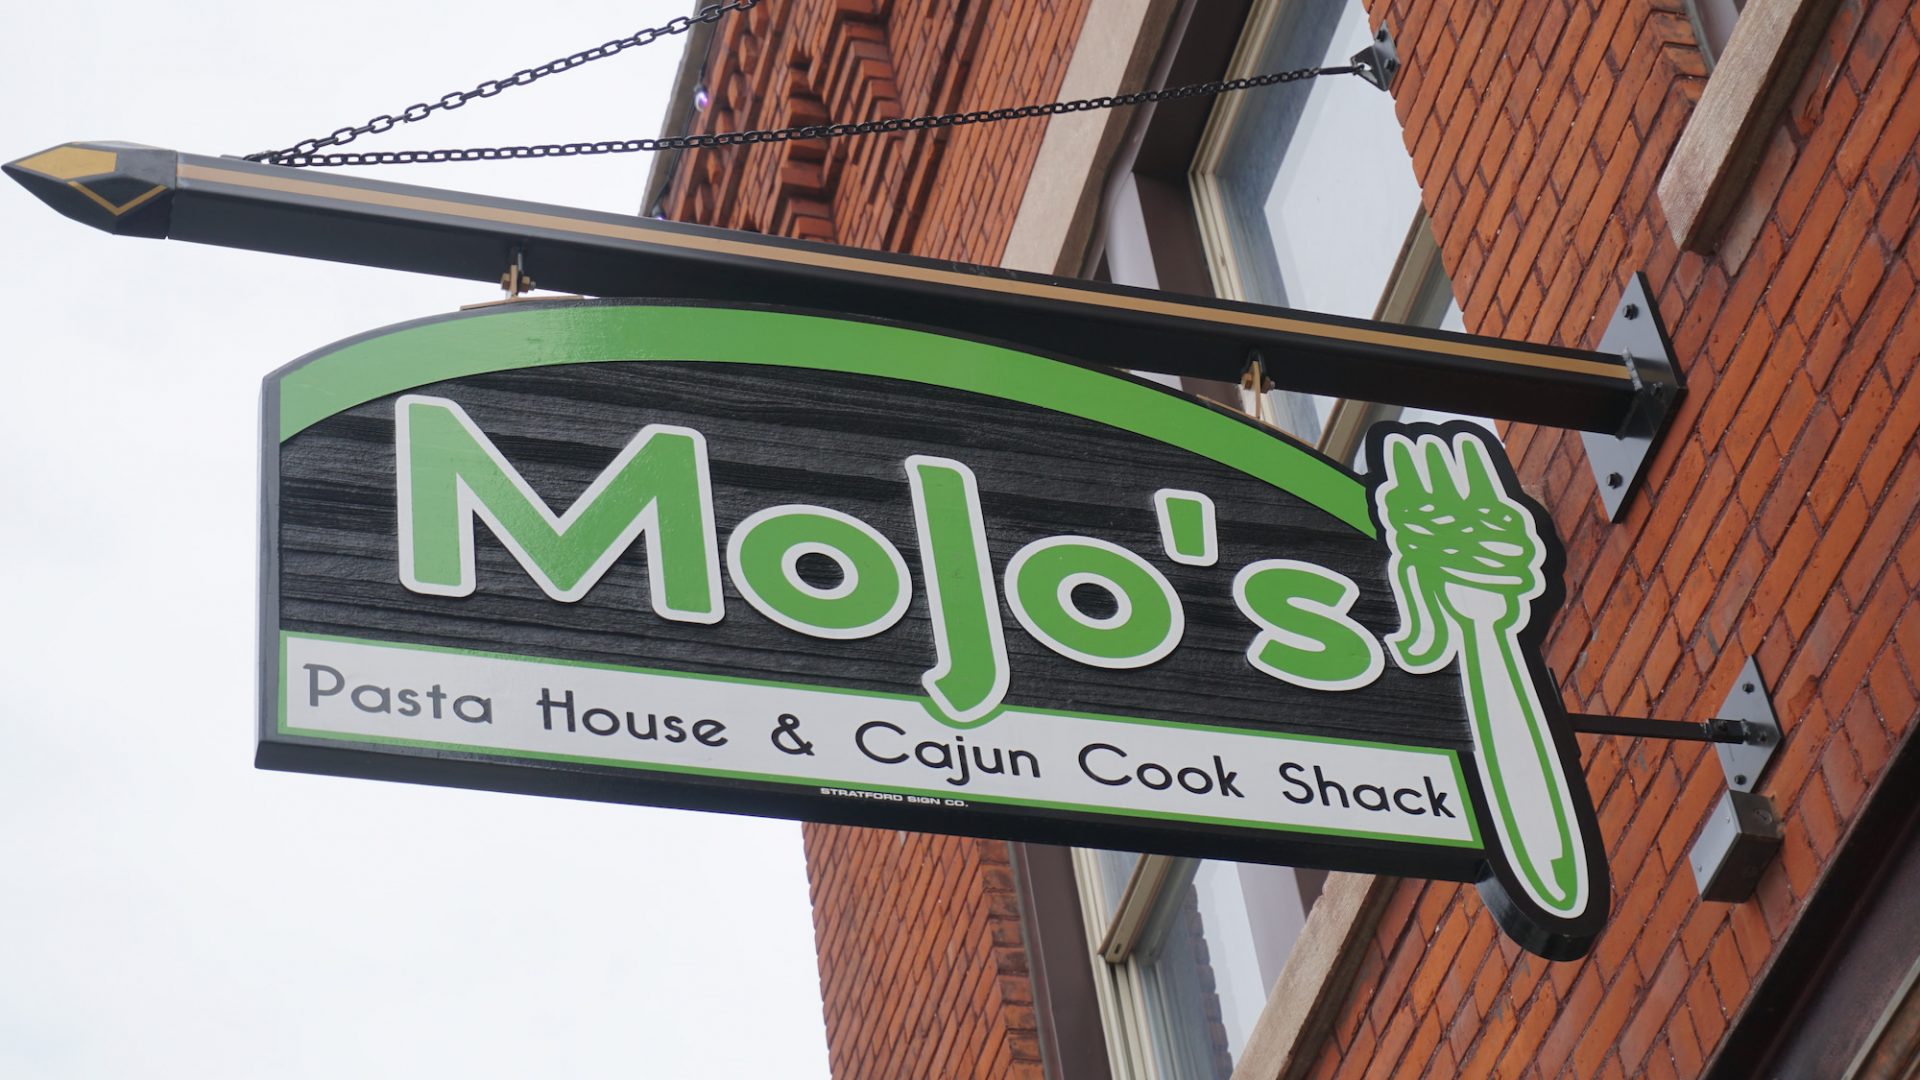 Mojo’s Pasta House and Cajun Cook Shack: Mojo's outdoor sign